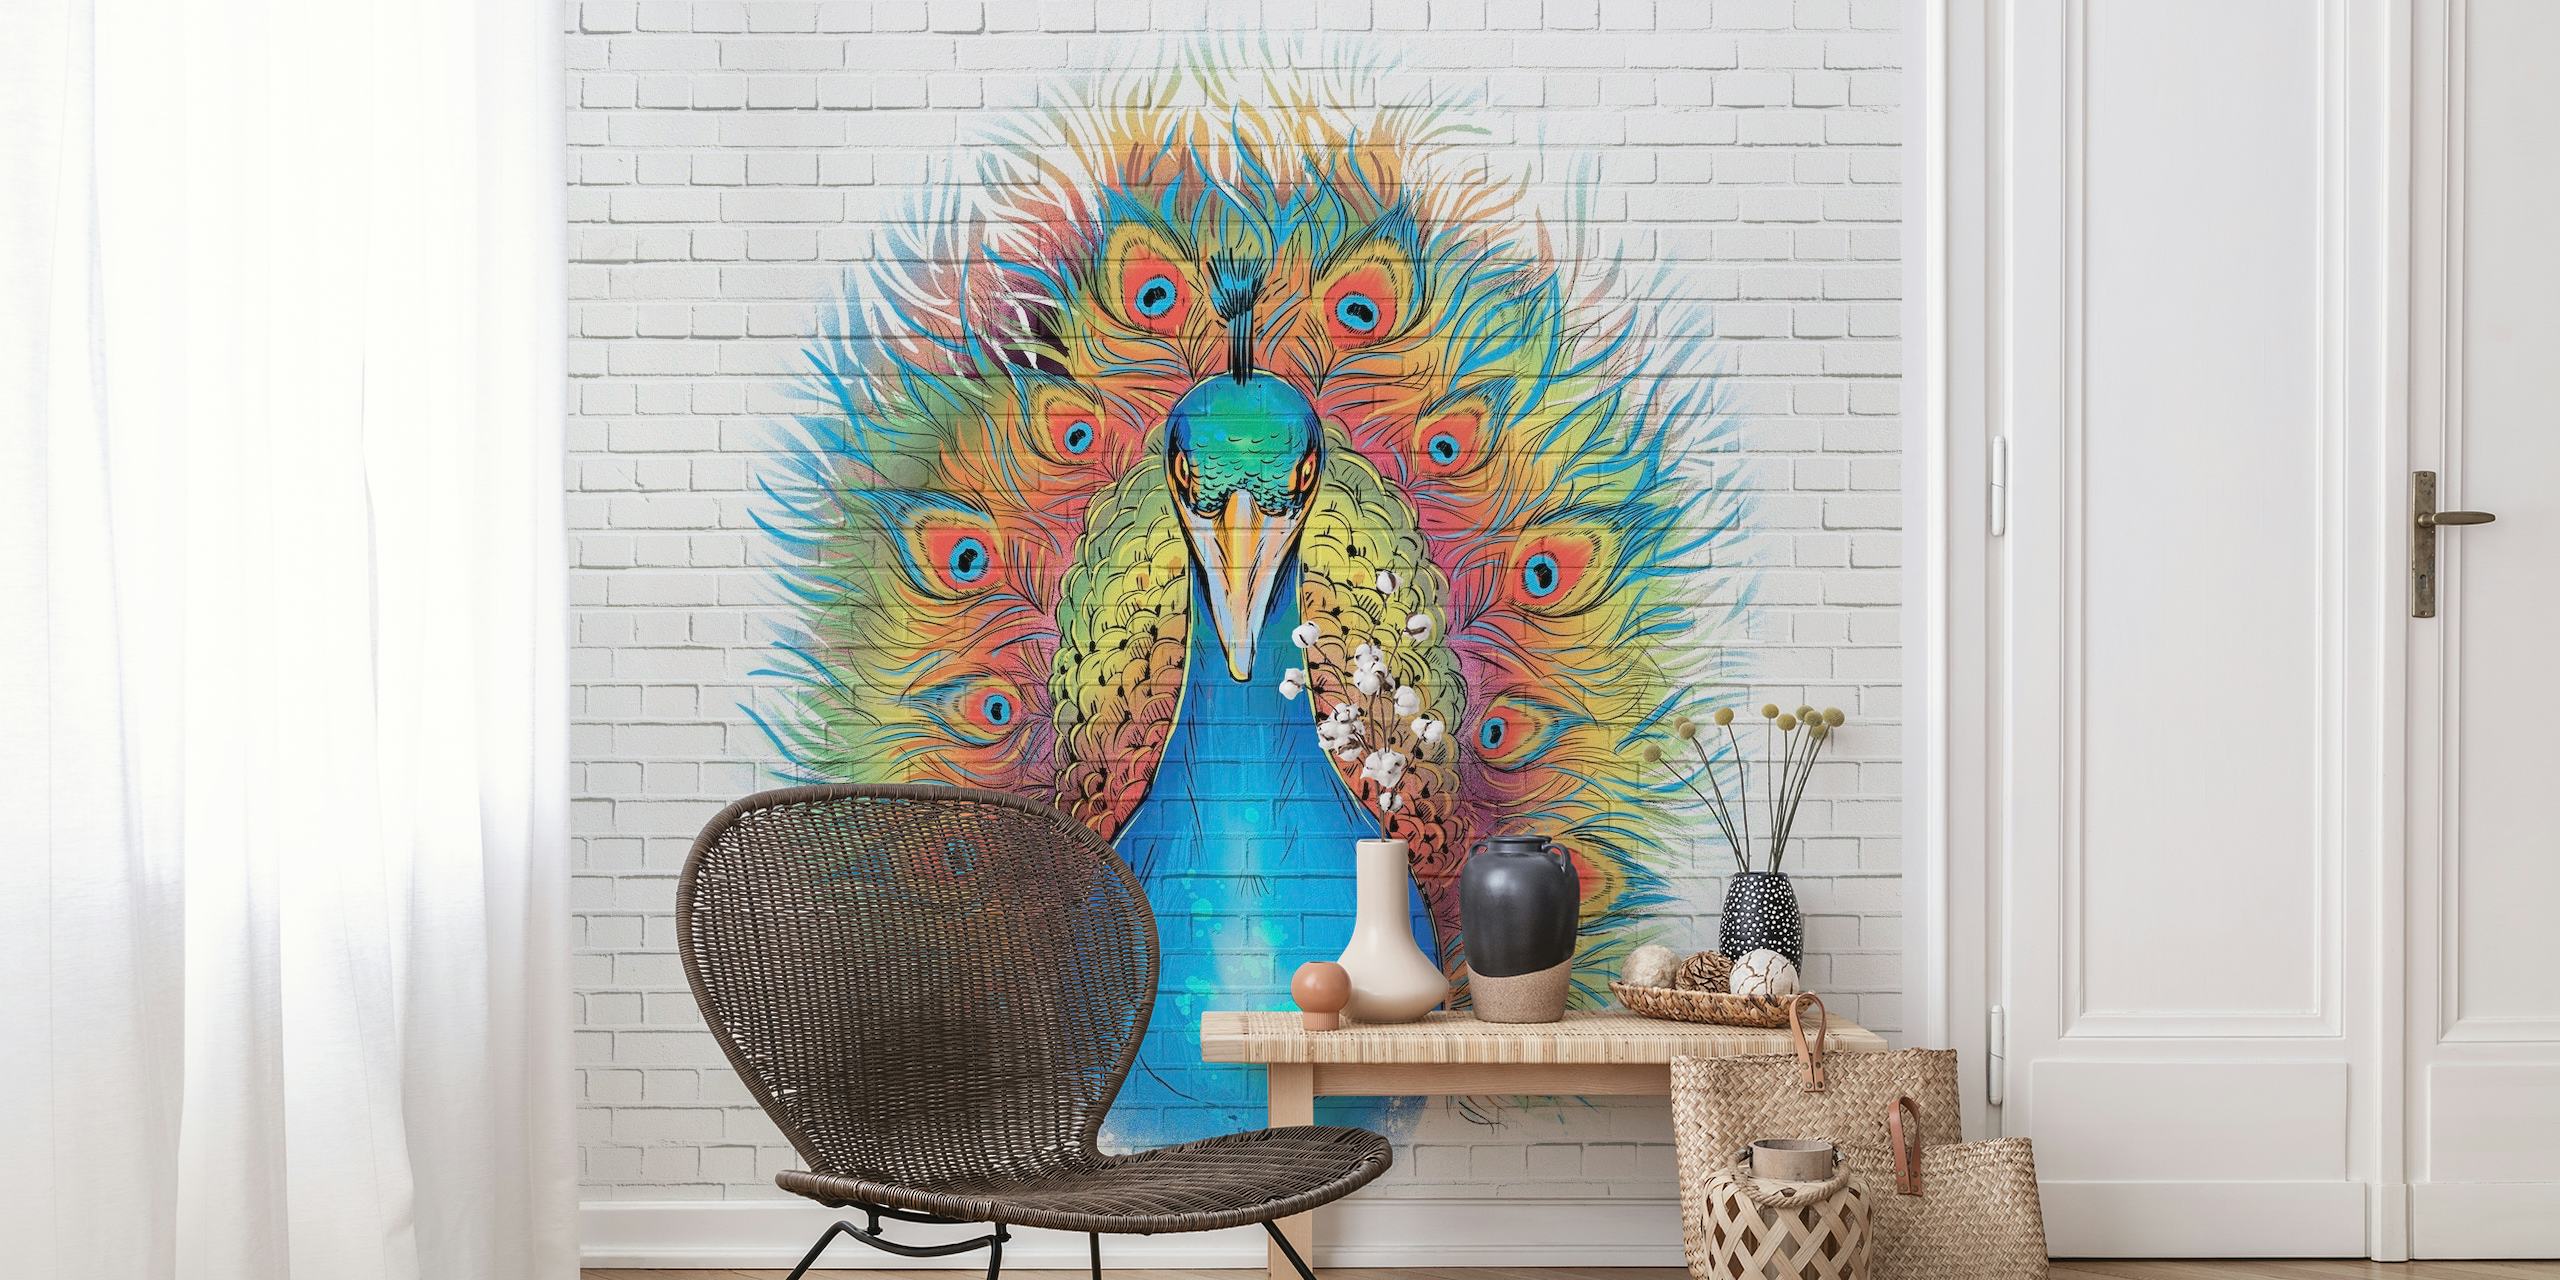 Street art inspired Angry Peacock Graffiti wall mural with vivacious colors on a white brick background